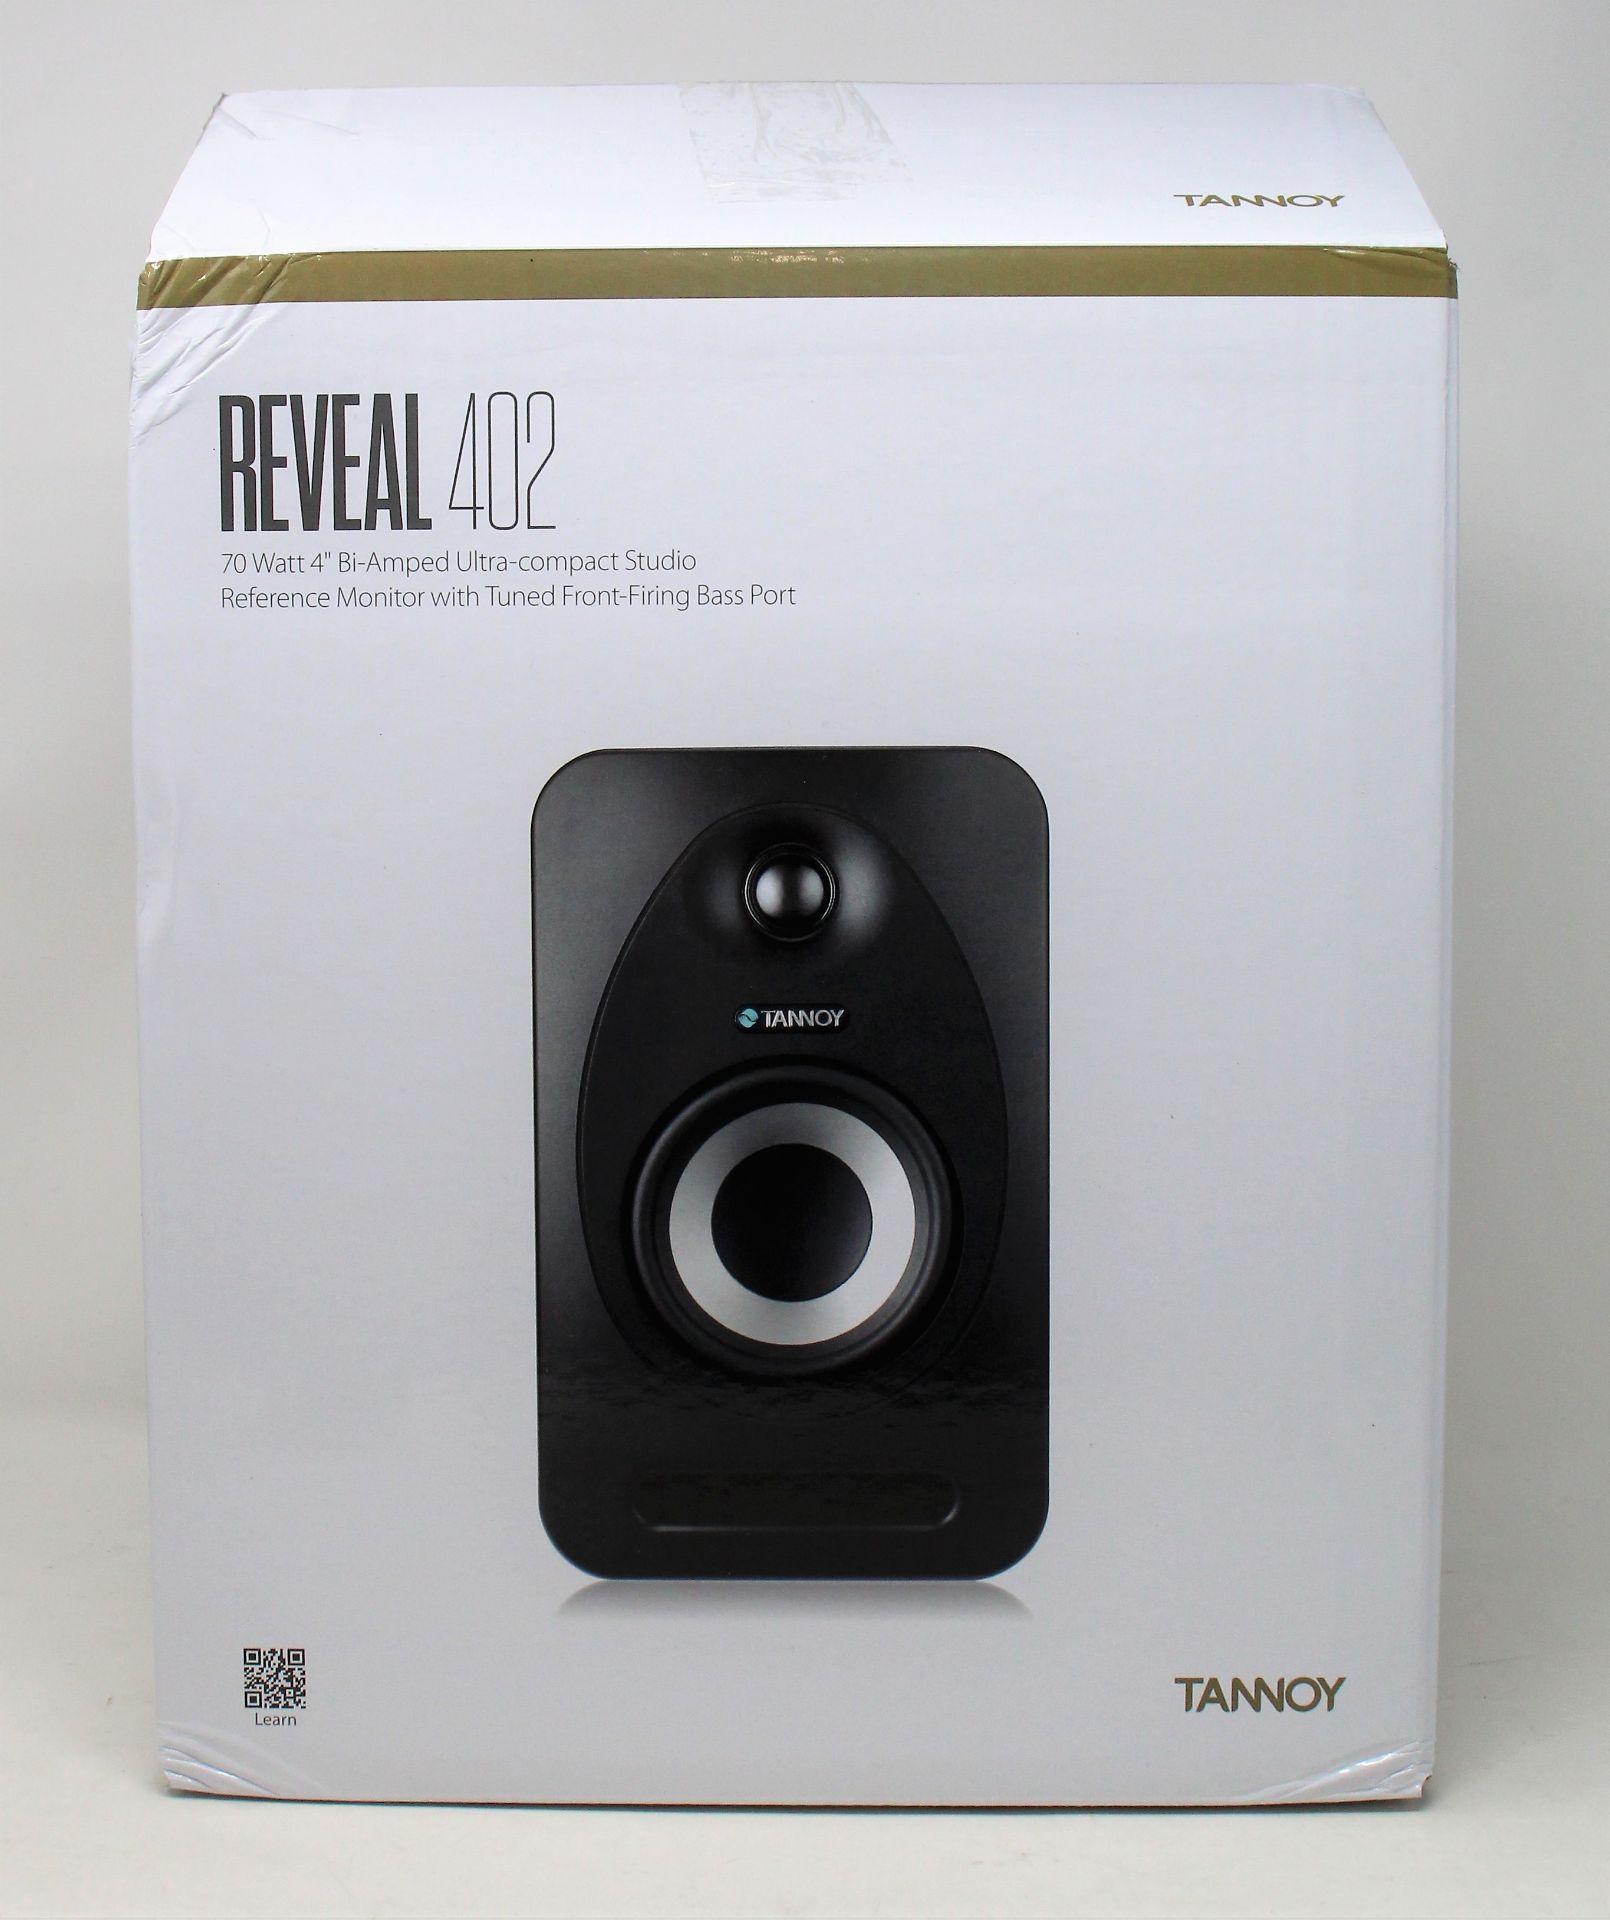 A boxed as new Tannoy Reveal 402 studio monitor in black